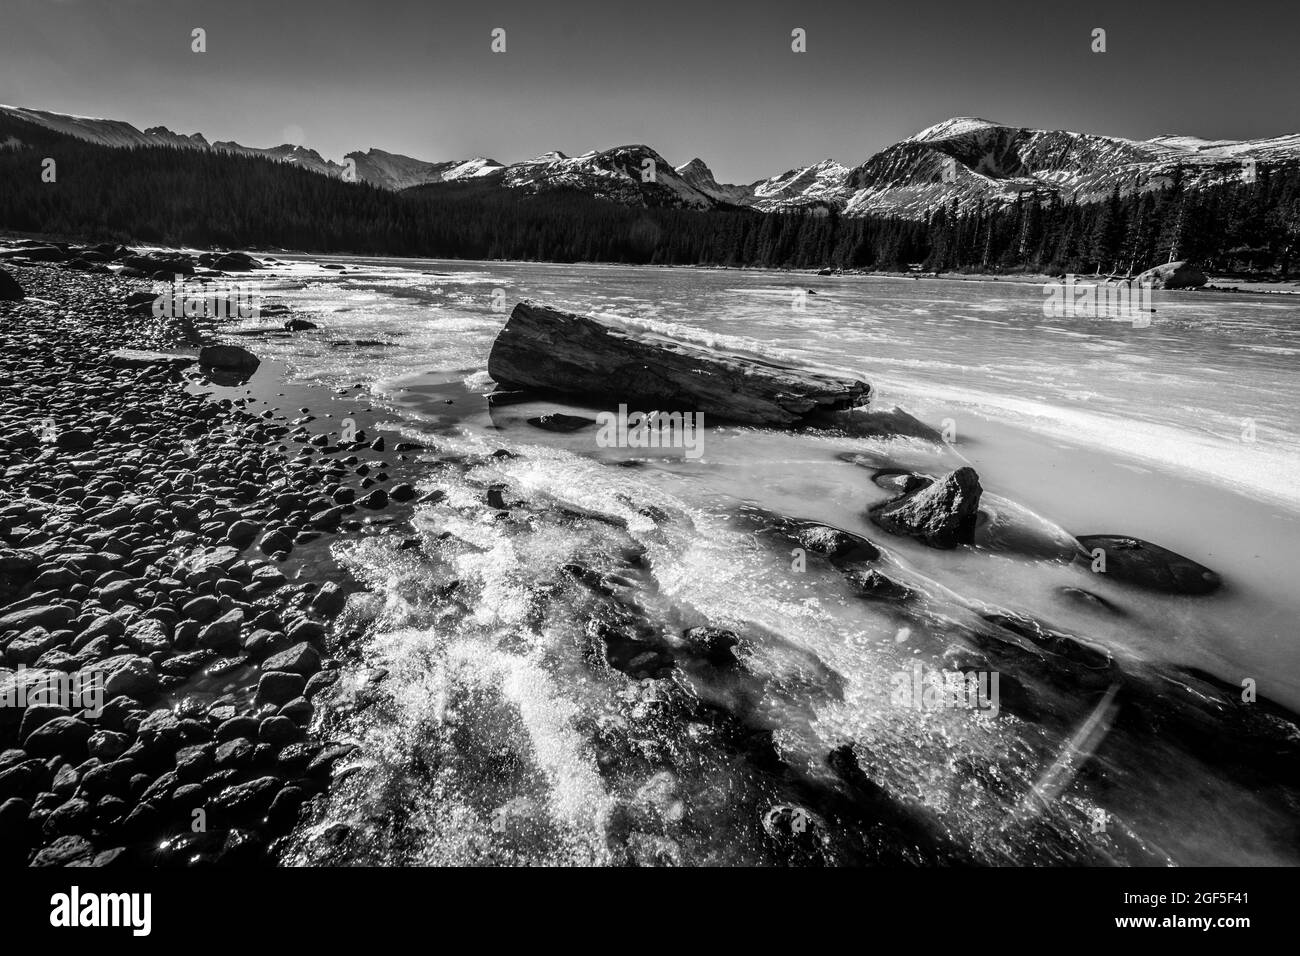 A wide angle landscape shot of a frozen lake with a log and rocks in it with mountains and a pine tree line in the background in winter in Colorado Stock Photo